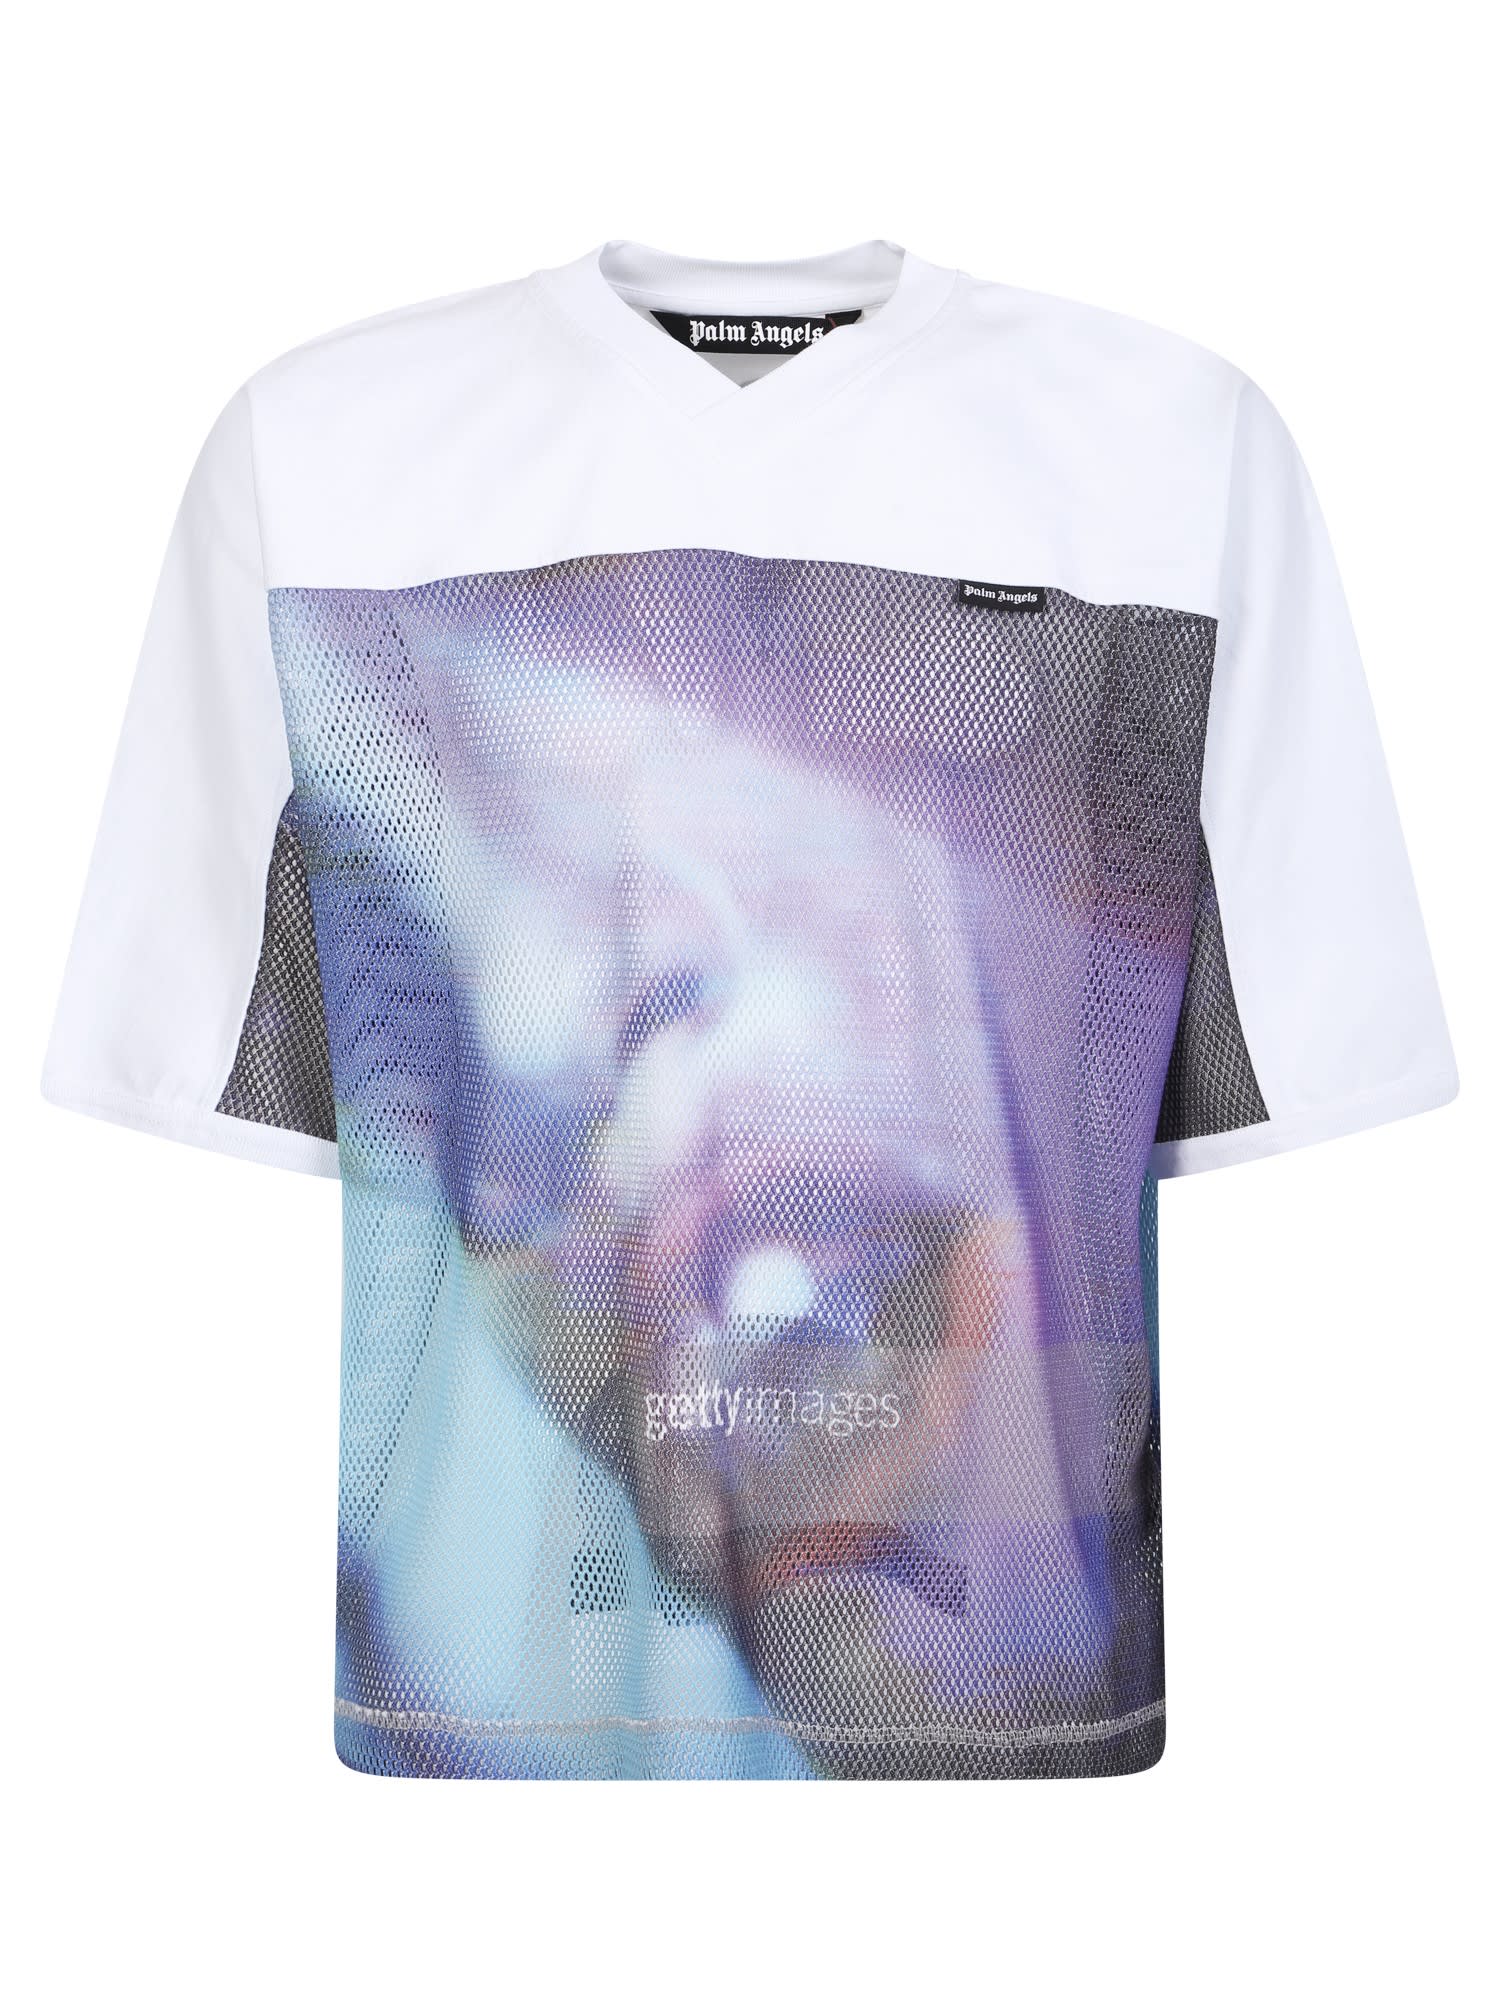 PALM ANGELS MULTICOLOR GETTY MIAMI T-SHIRT